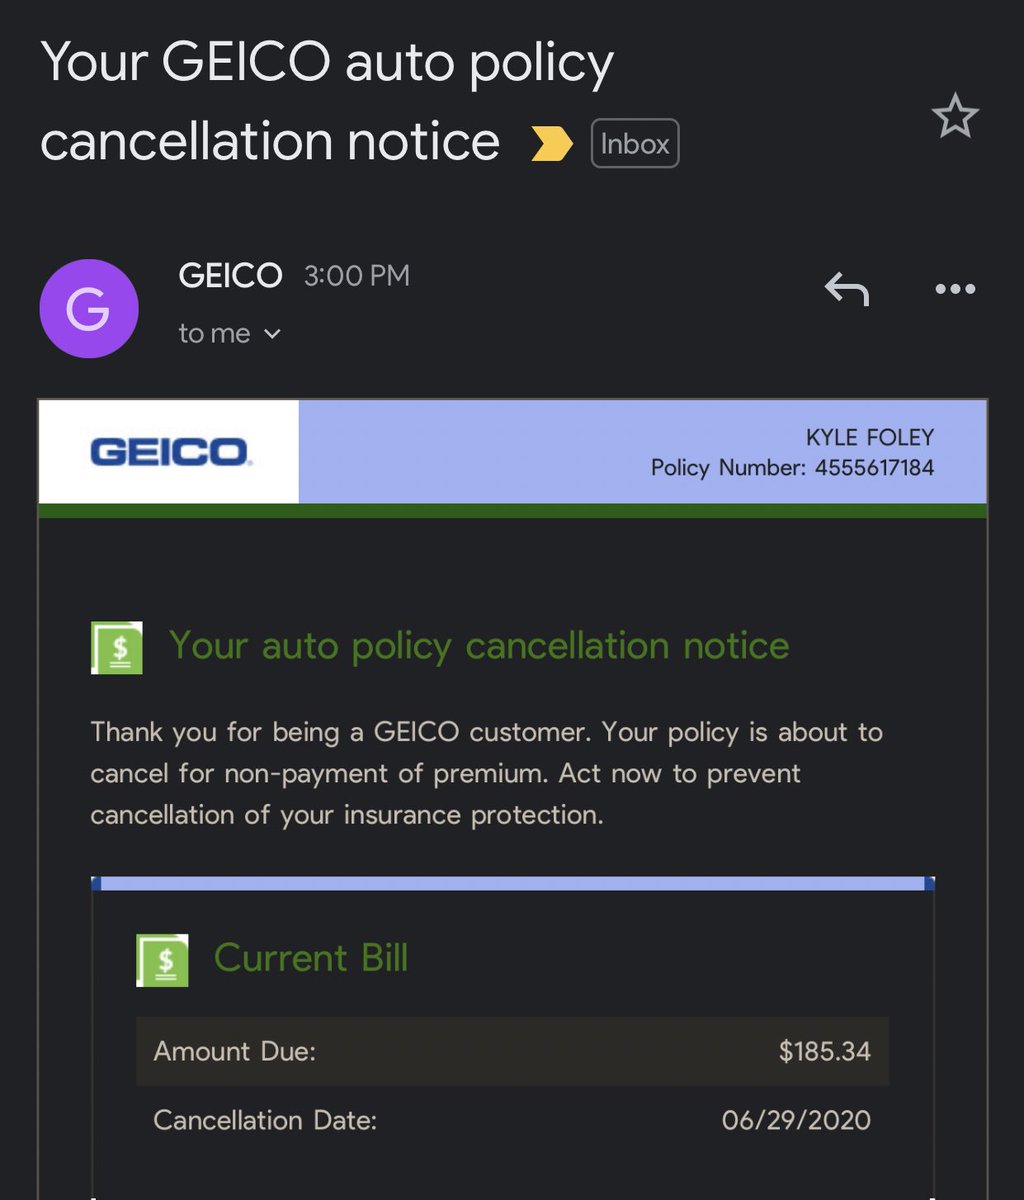 Excellent, Geico is actually just canceling my policy because I can’t afford to pay more than ~half of what I owed. FML